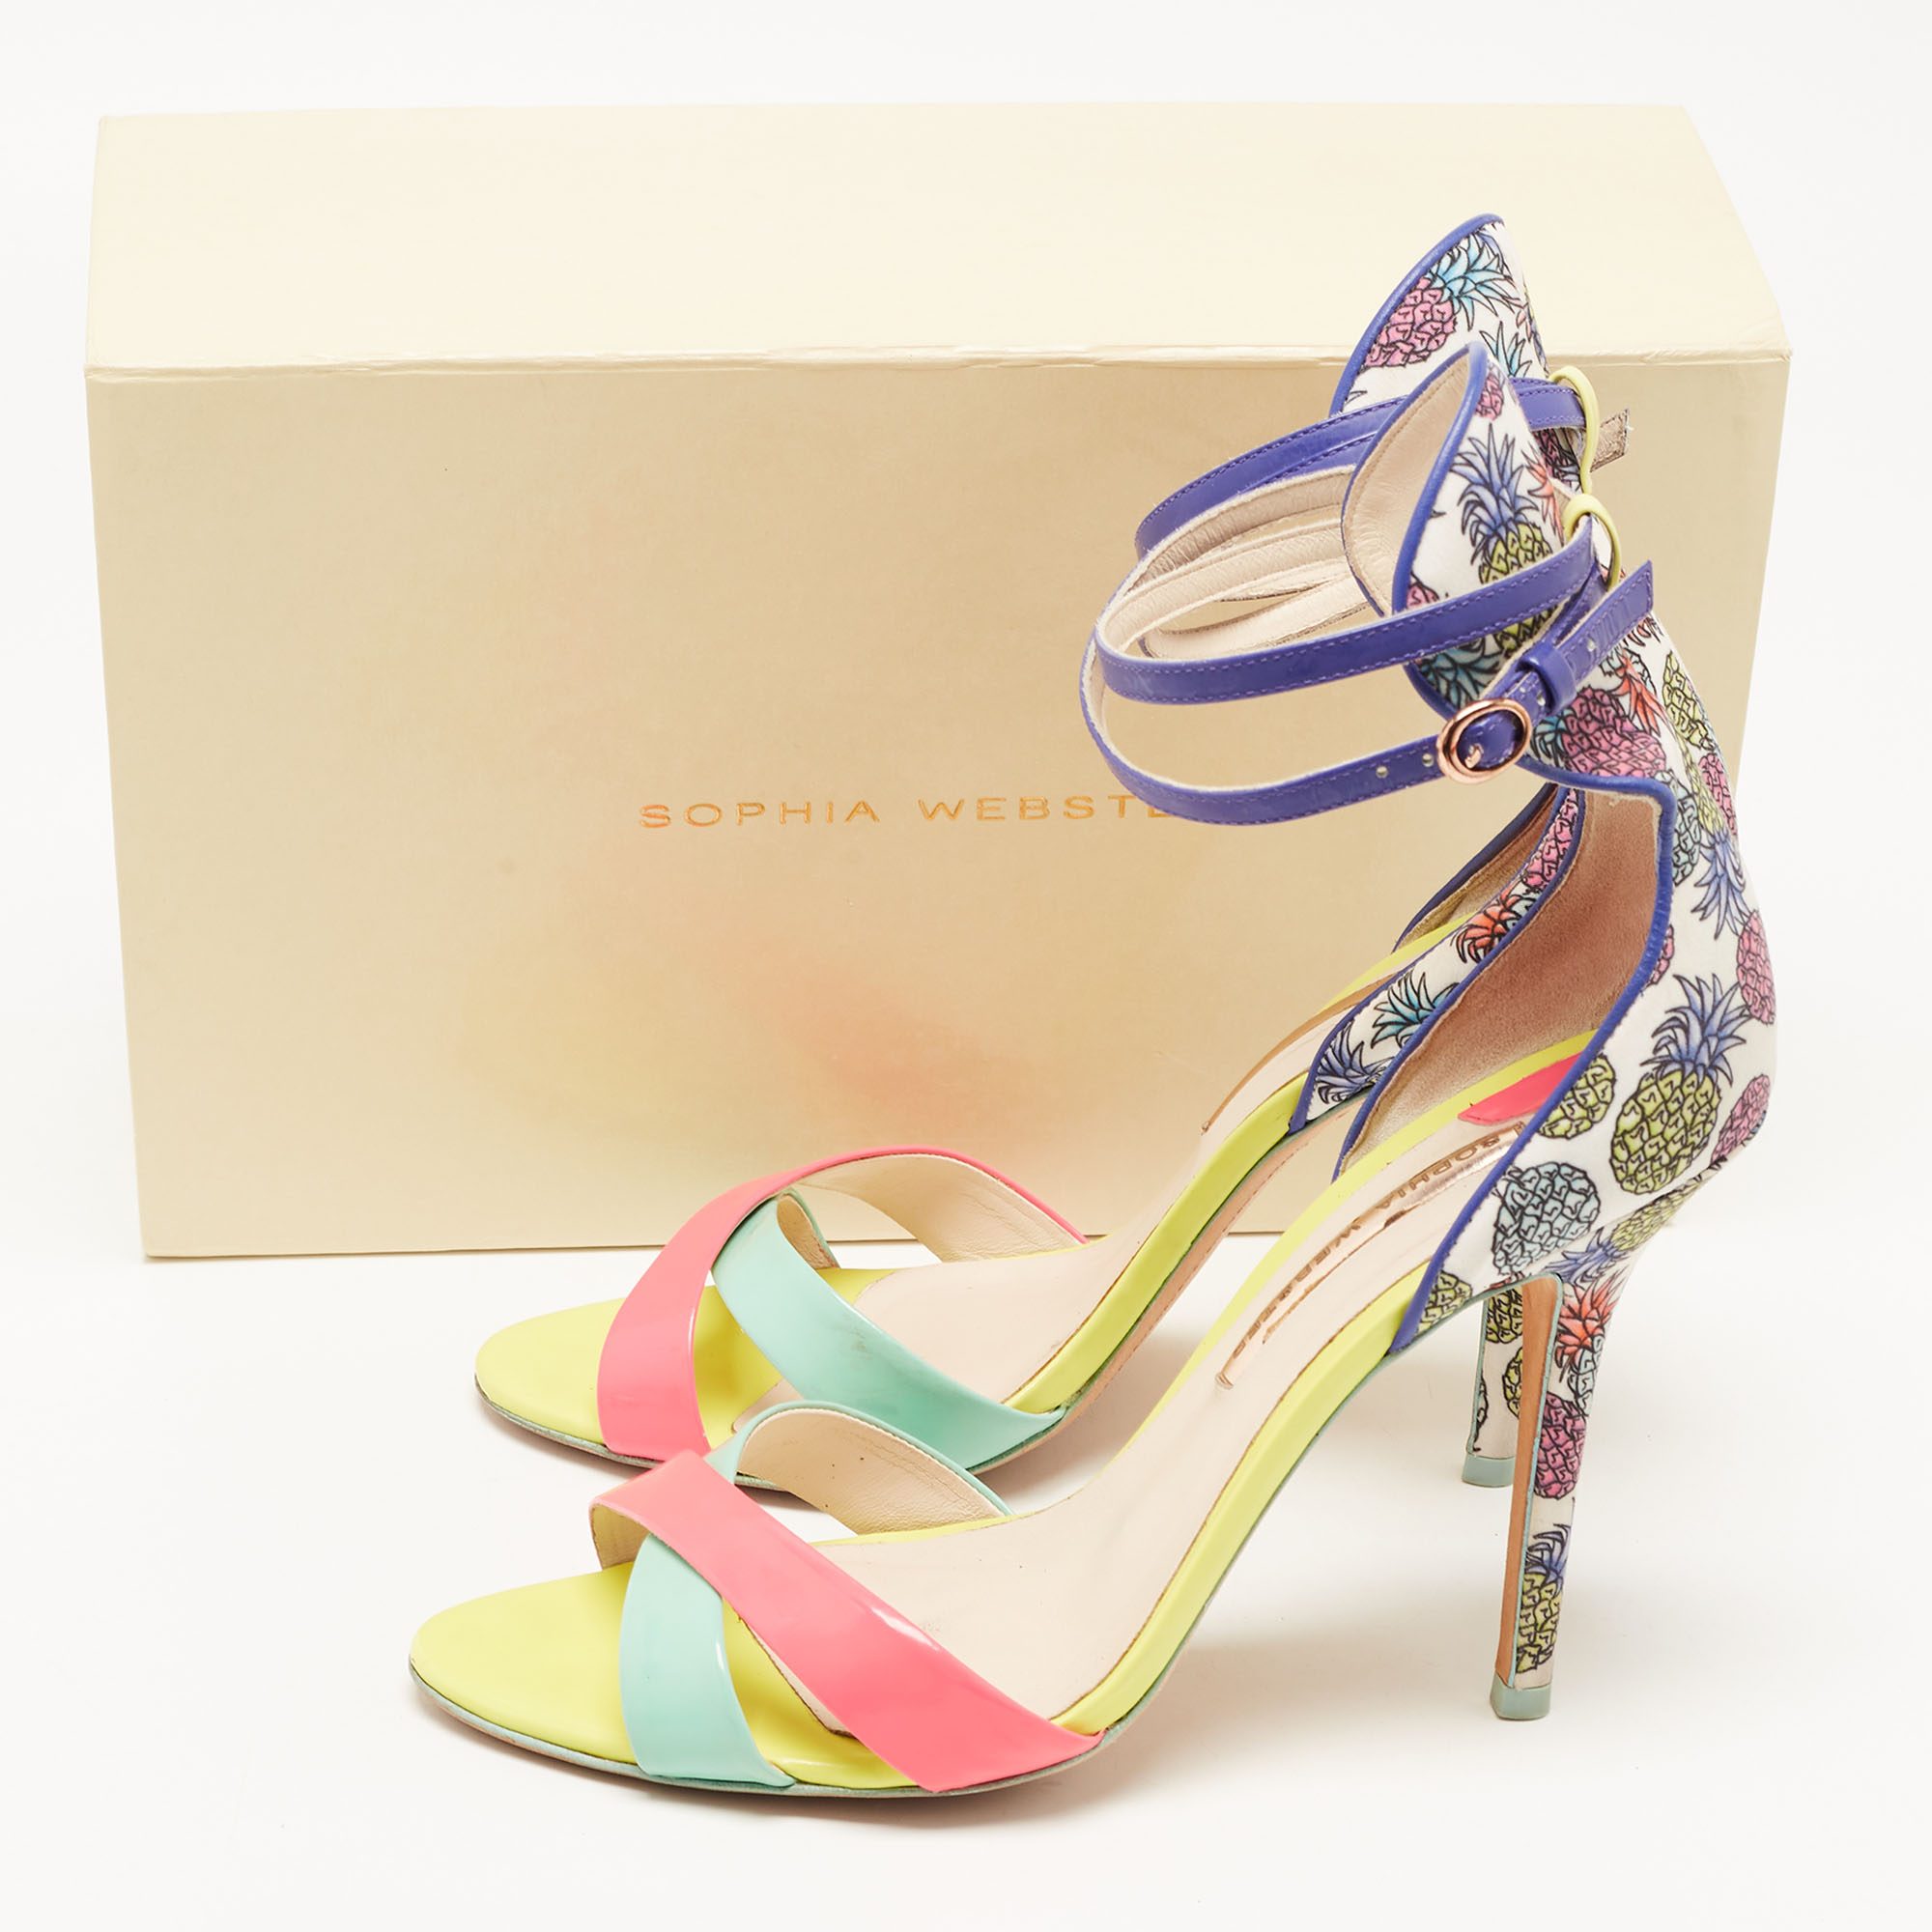 Sophia Webster Multicolor Leather And Printed Fabric Nicole Ankle Strap Sandals Size 41